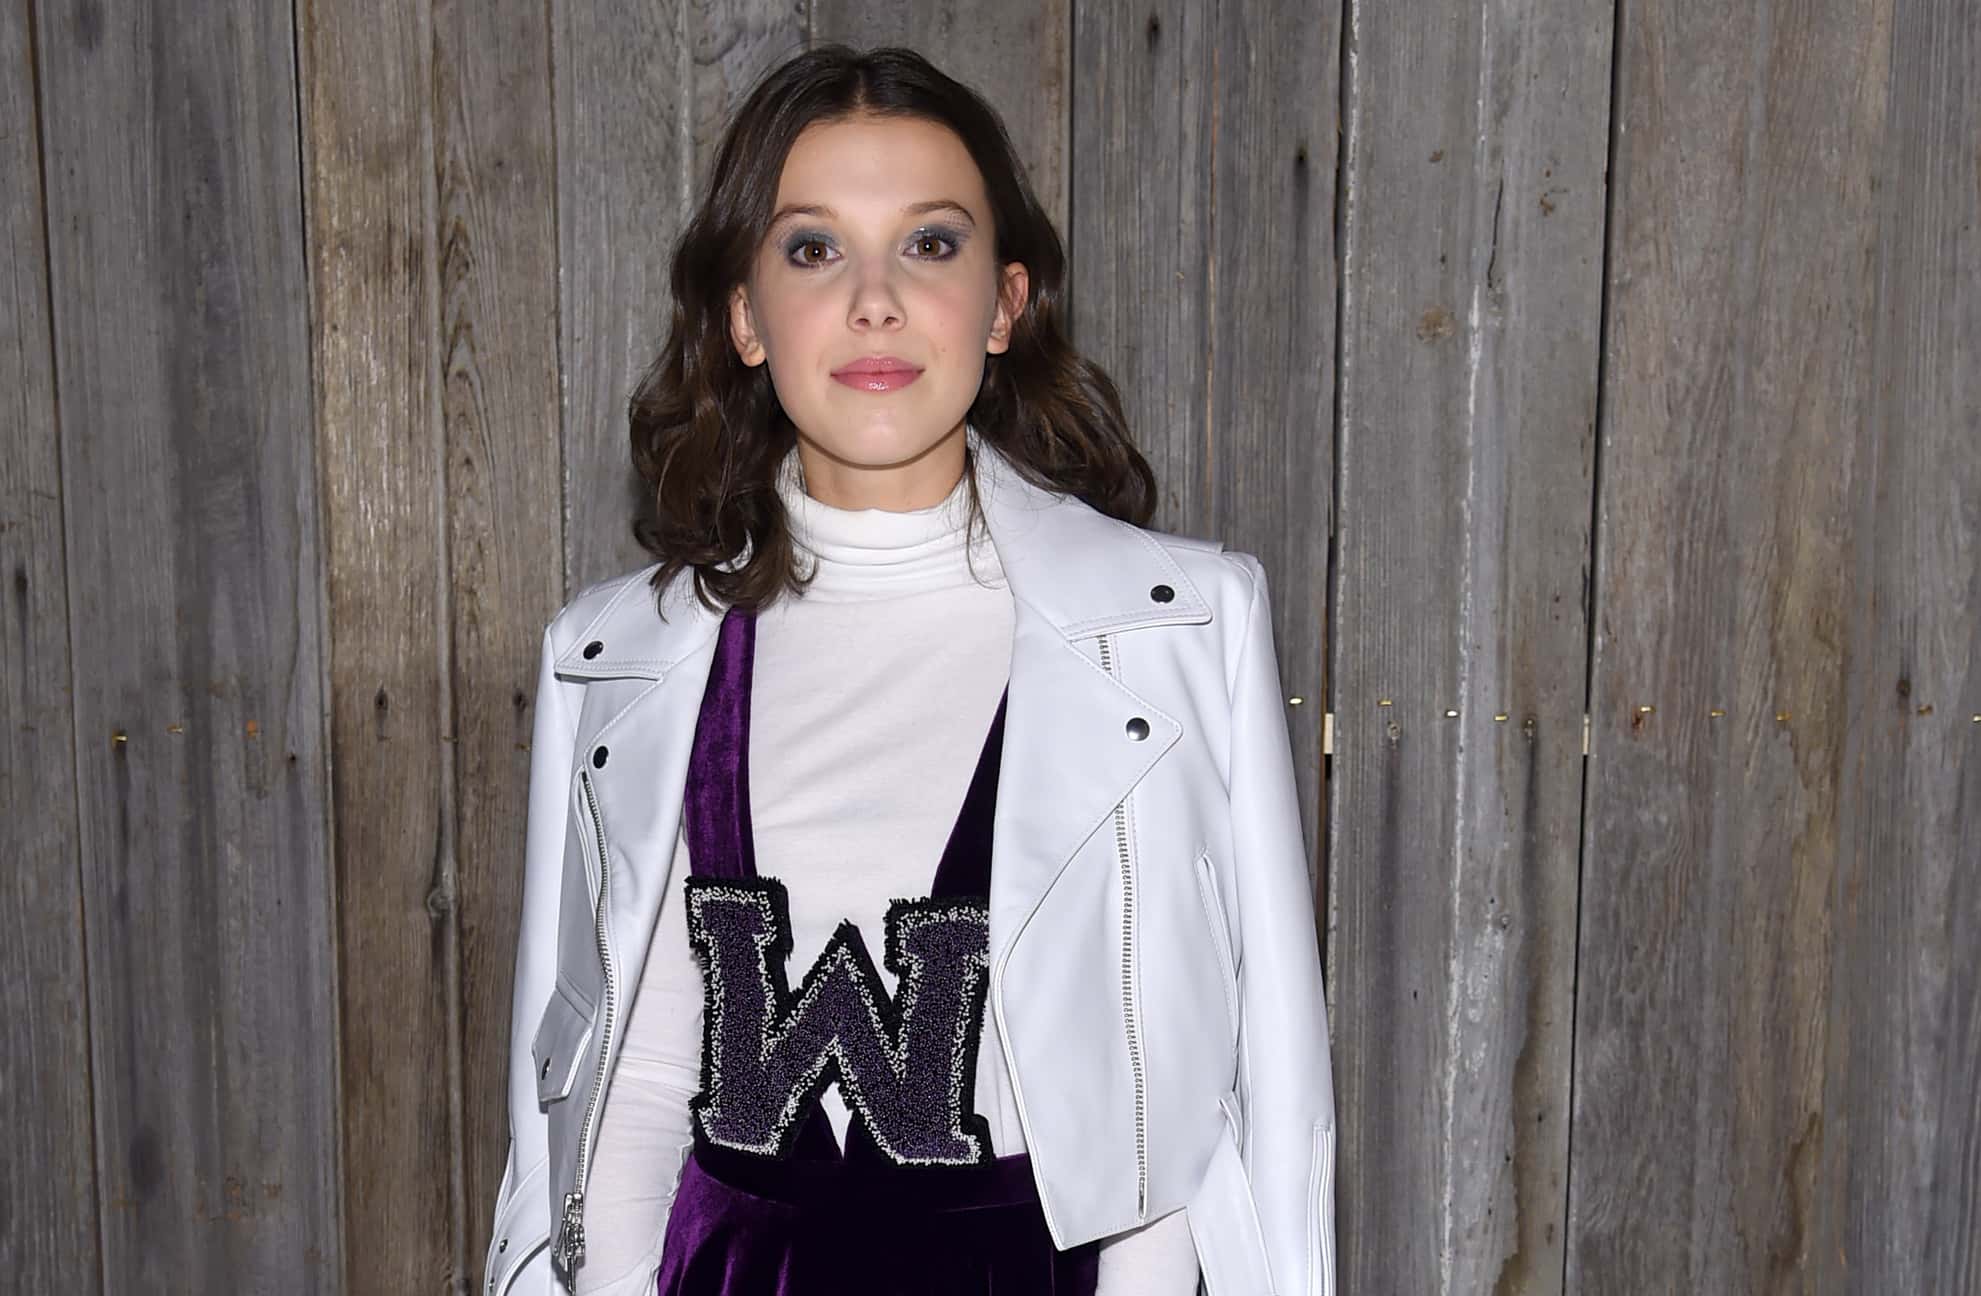 Millie Bobby Brown facts